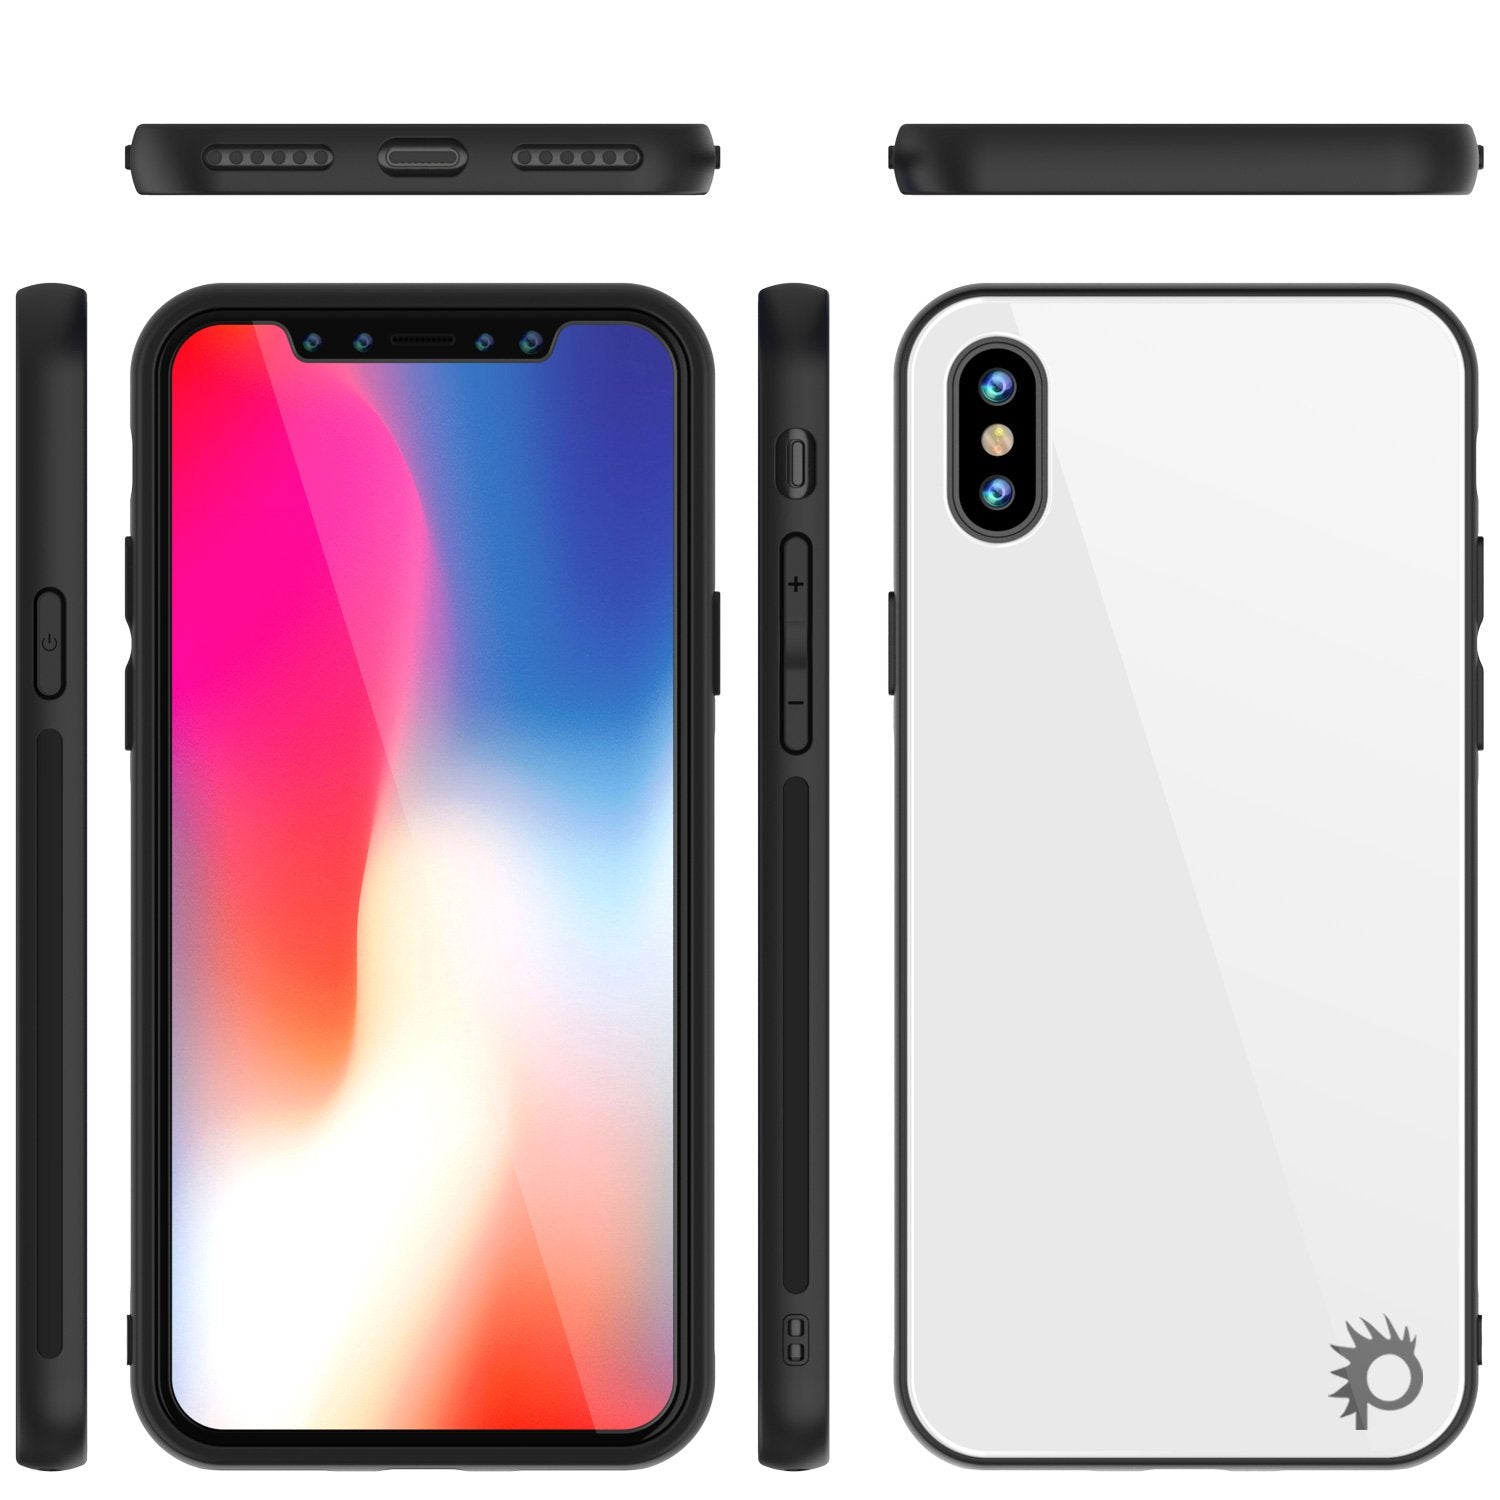 iPhone X Case, Punkcase GlassShield Ultra Thin Protective 9H Full Body Tempered Glass Cover W/ Drop Protection & Non Slip Grip for Apple iPhone 10 [White]